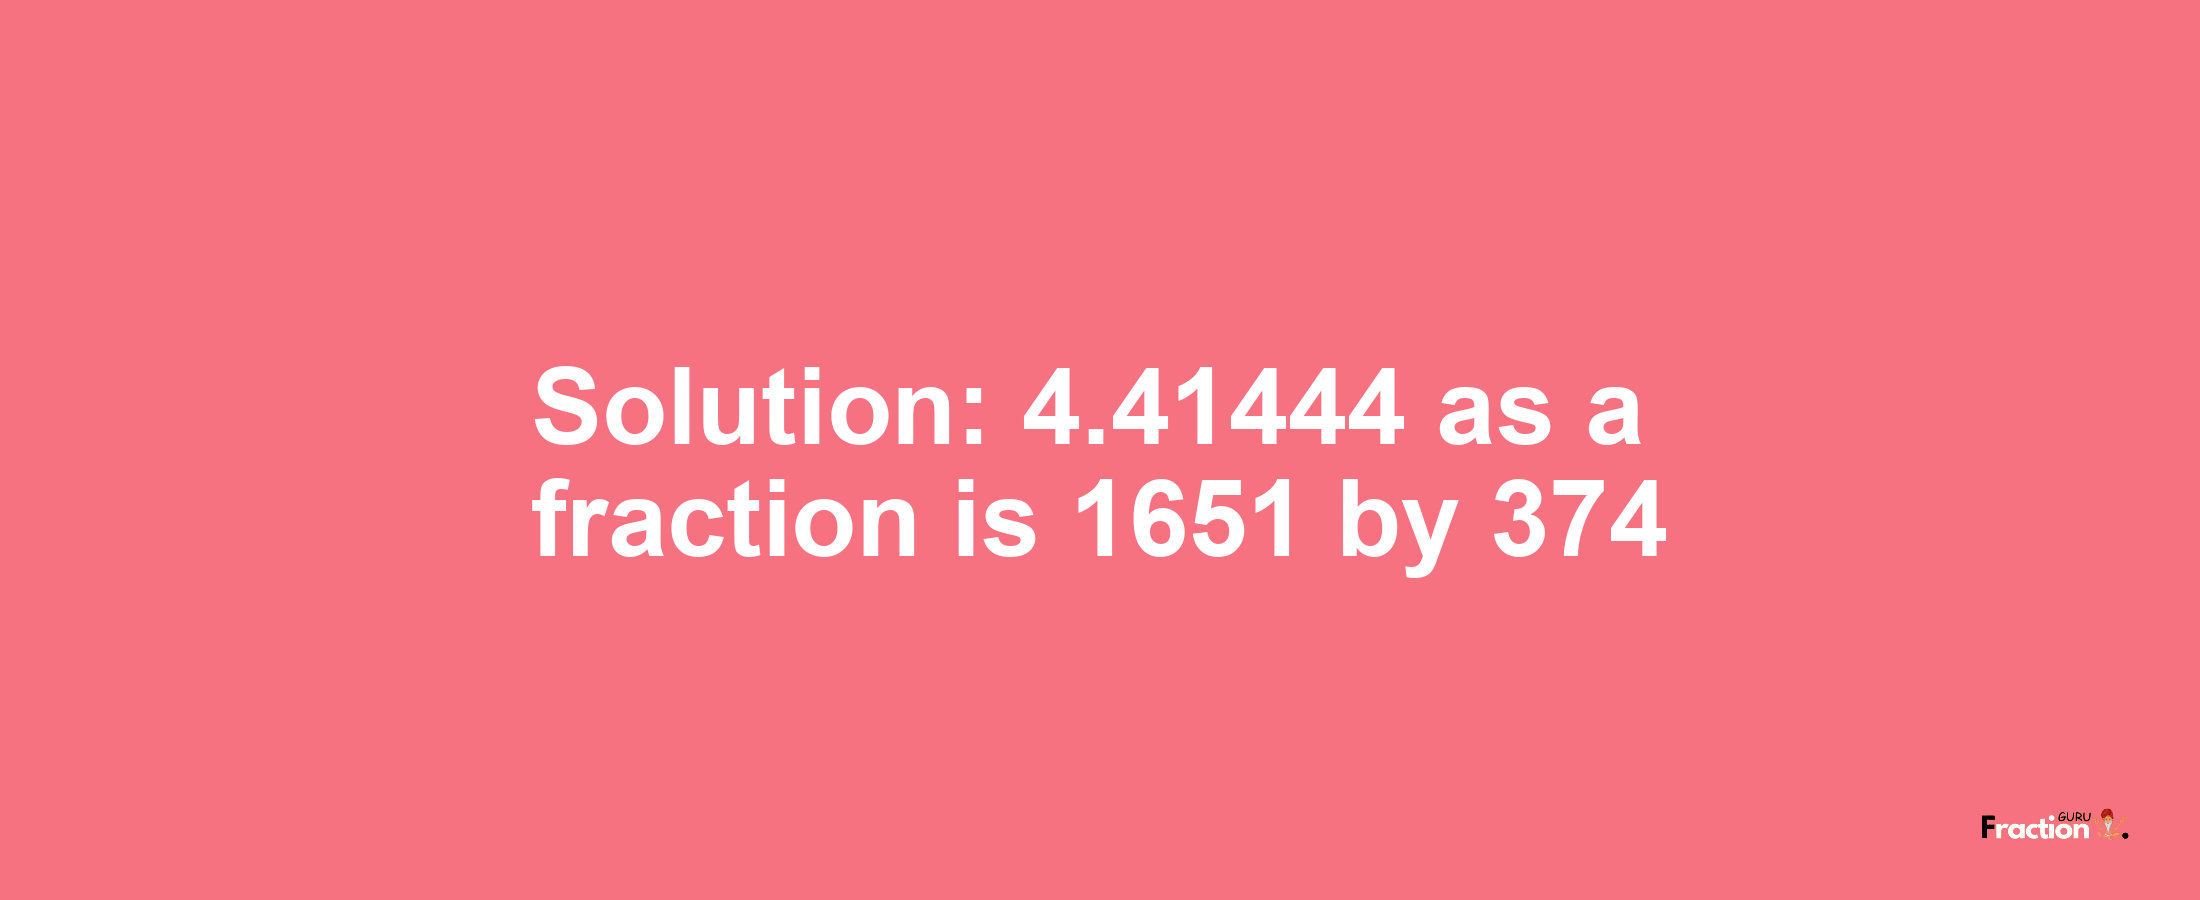 Solution:4.41444 as a fraction is 1651/374